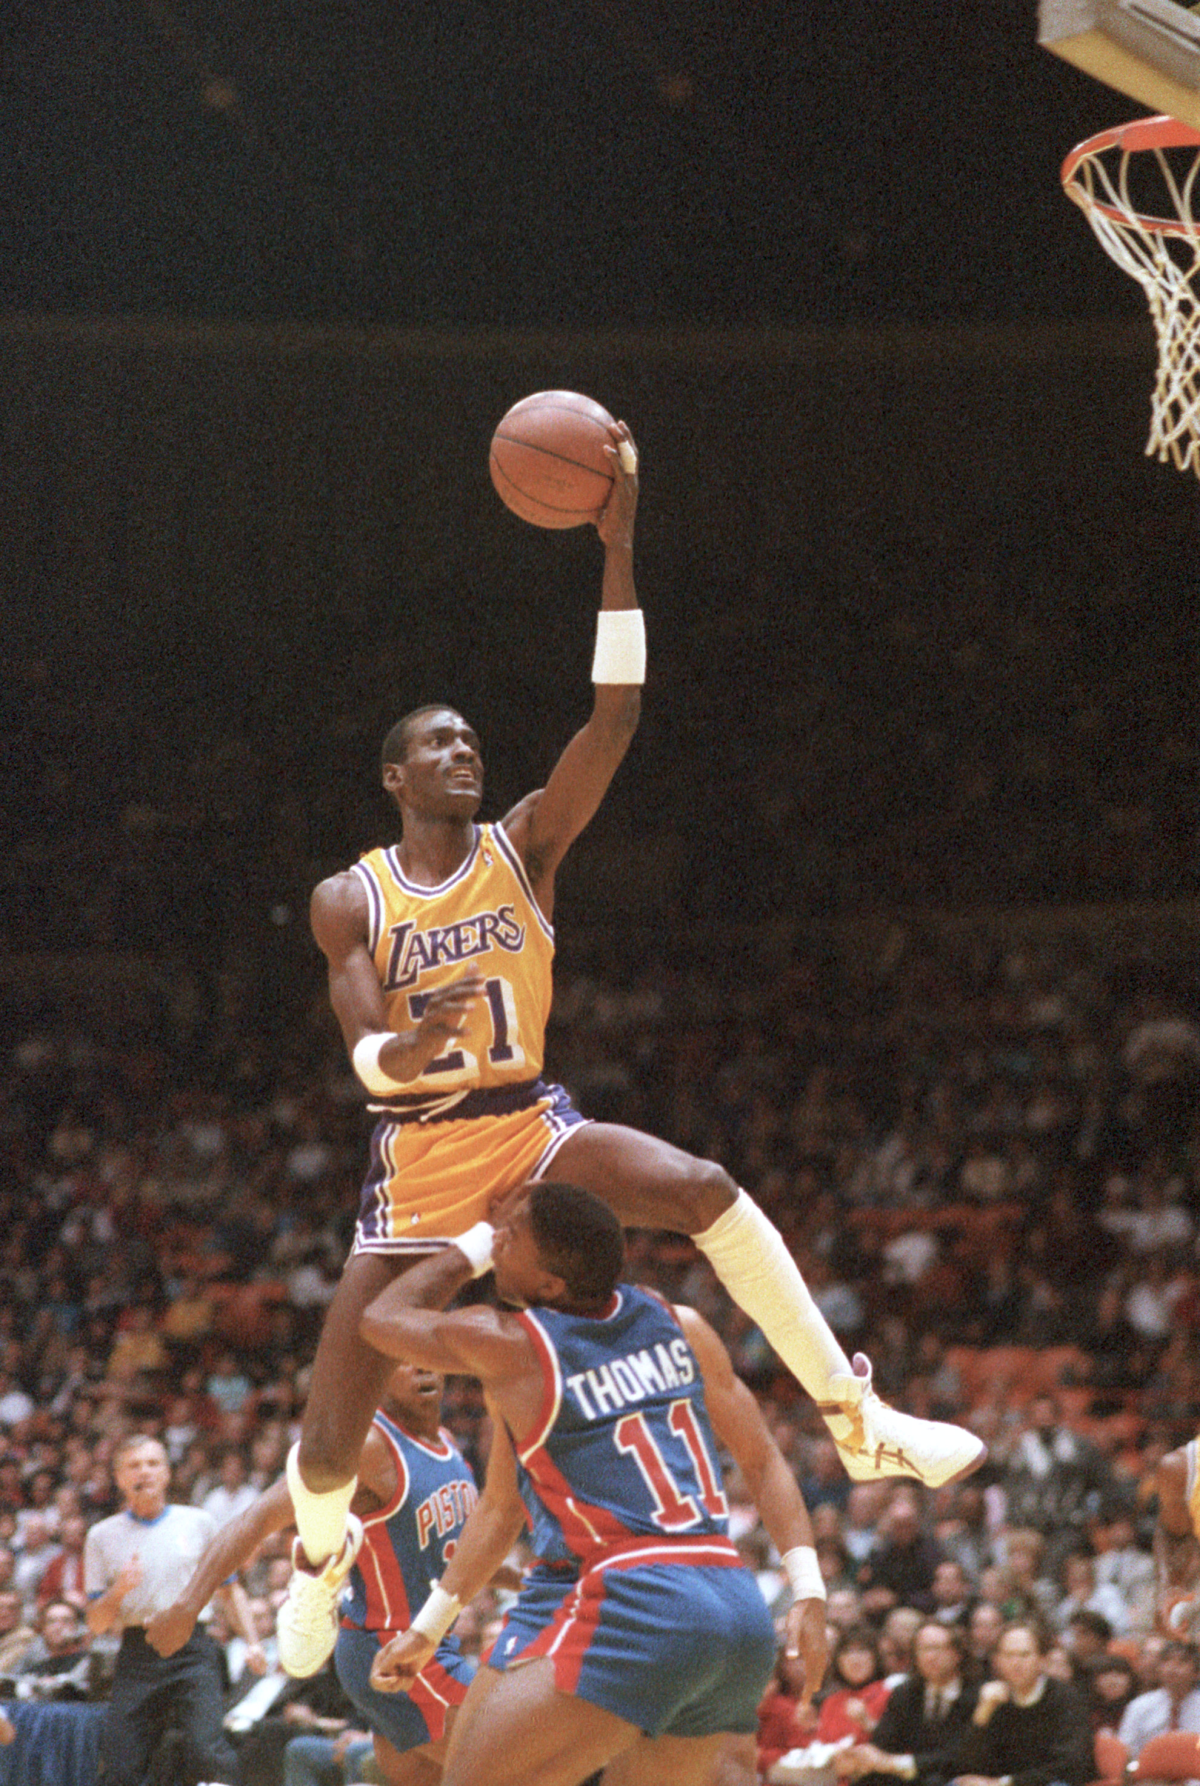 Lakers forward Michael Cooper elevates over Pistons guard Isiah Thomas for a layup.